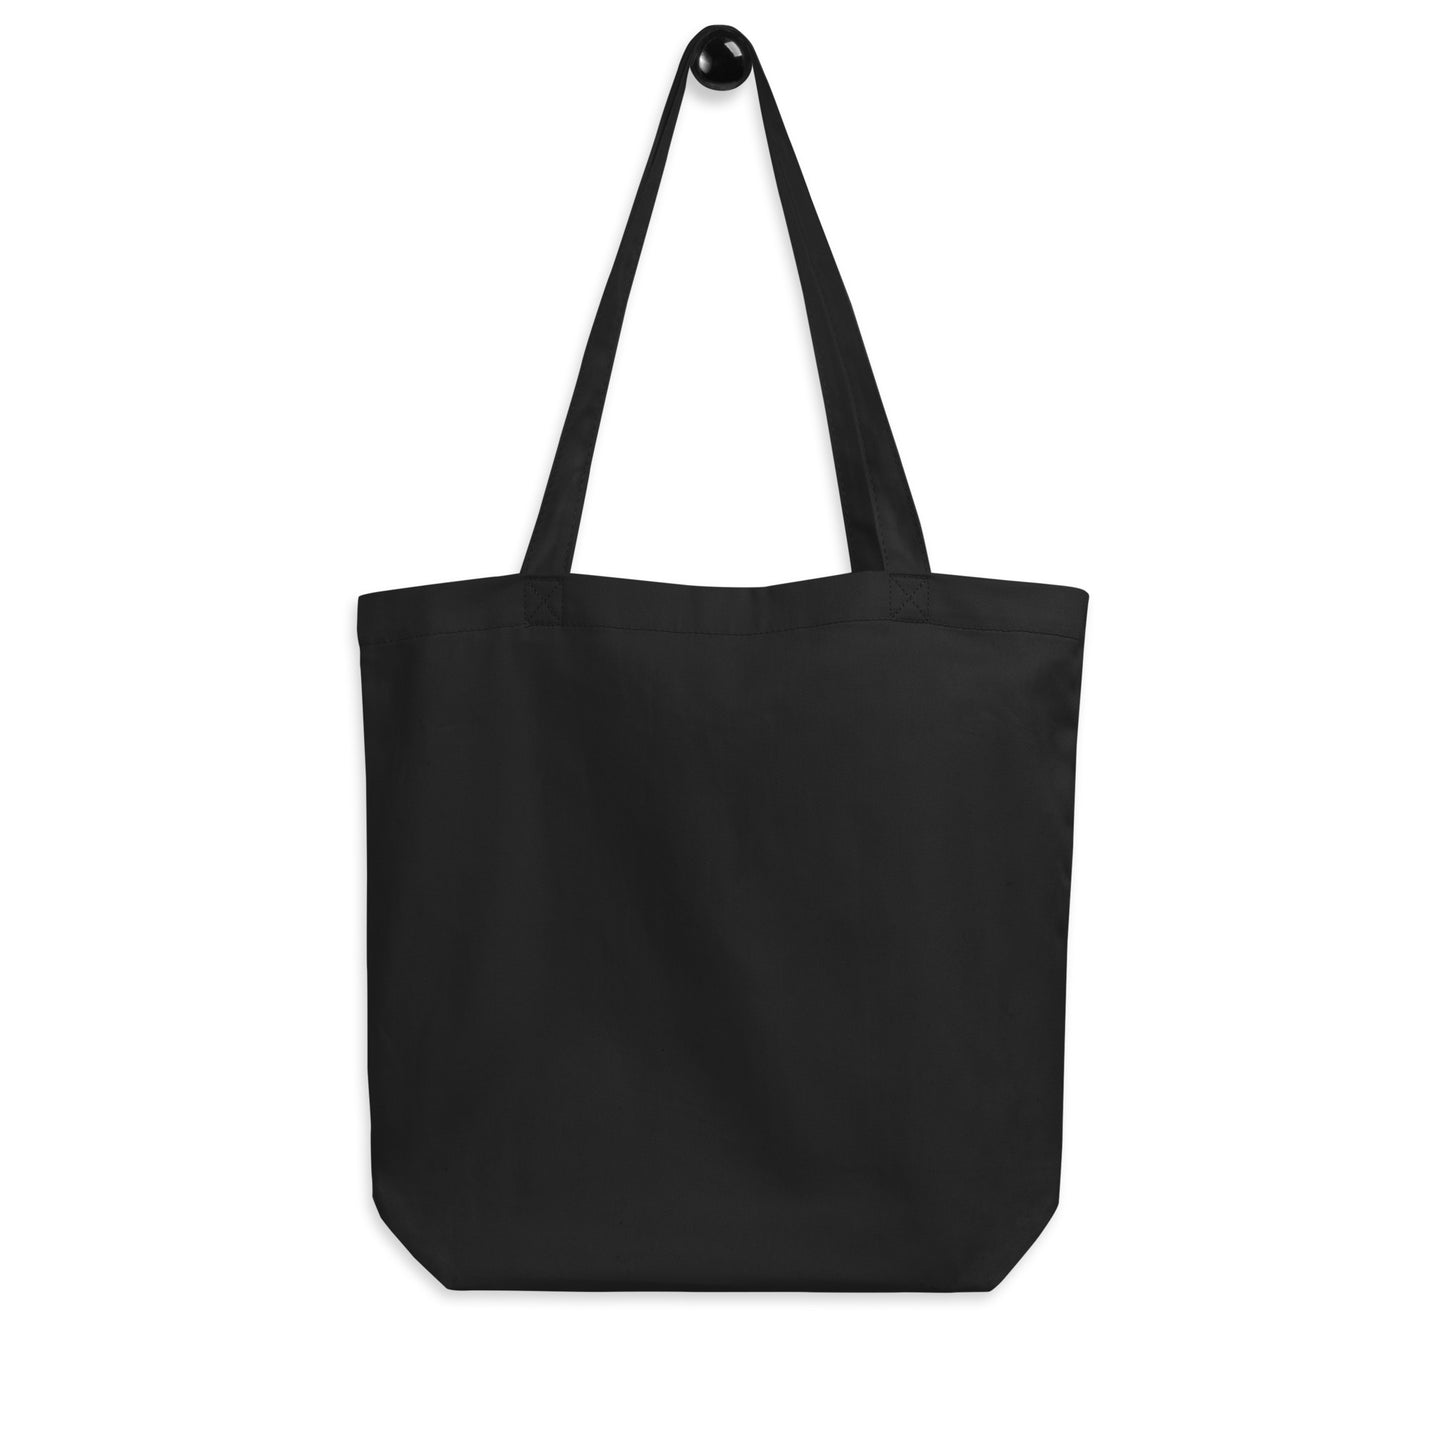 Unique Travel Gift Organic Tote - White Oval • WAW Warsaw • YHM Designs - Image 05